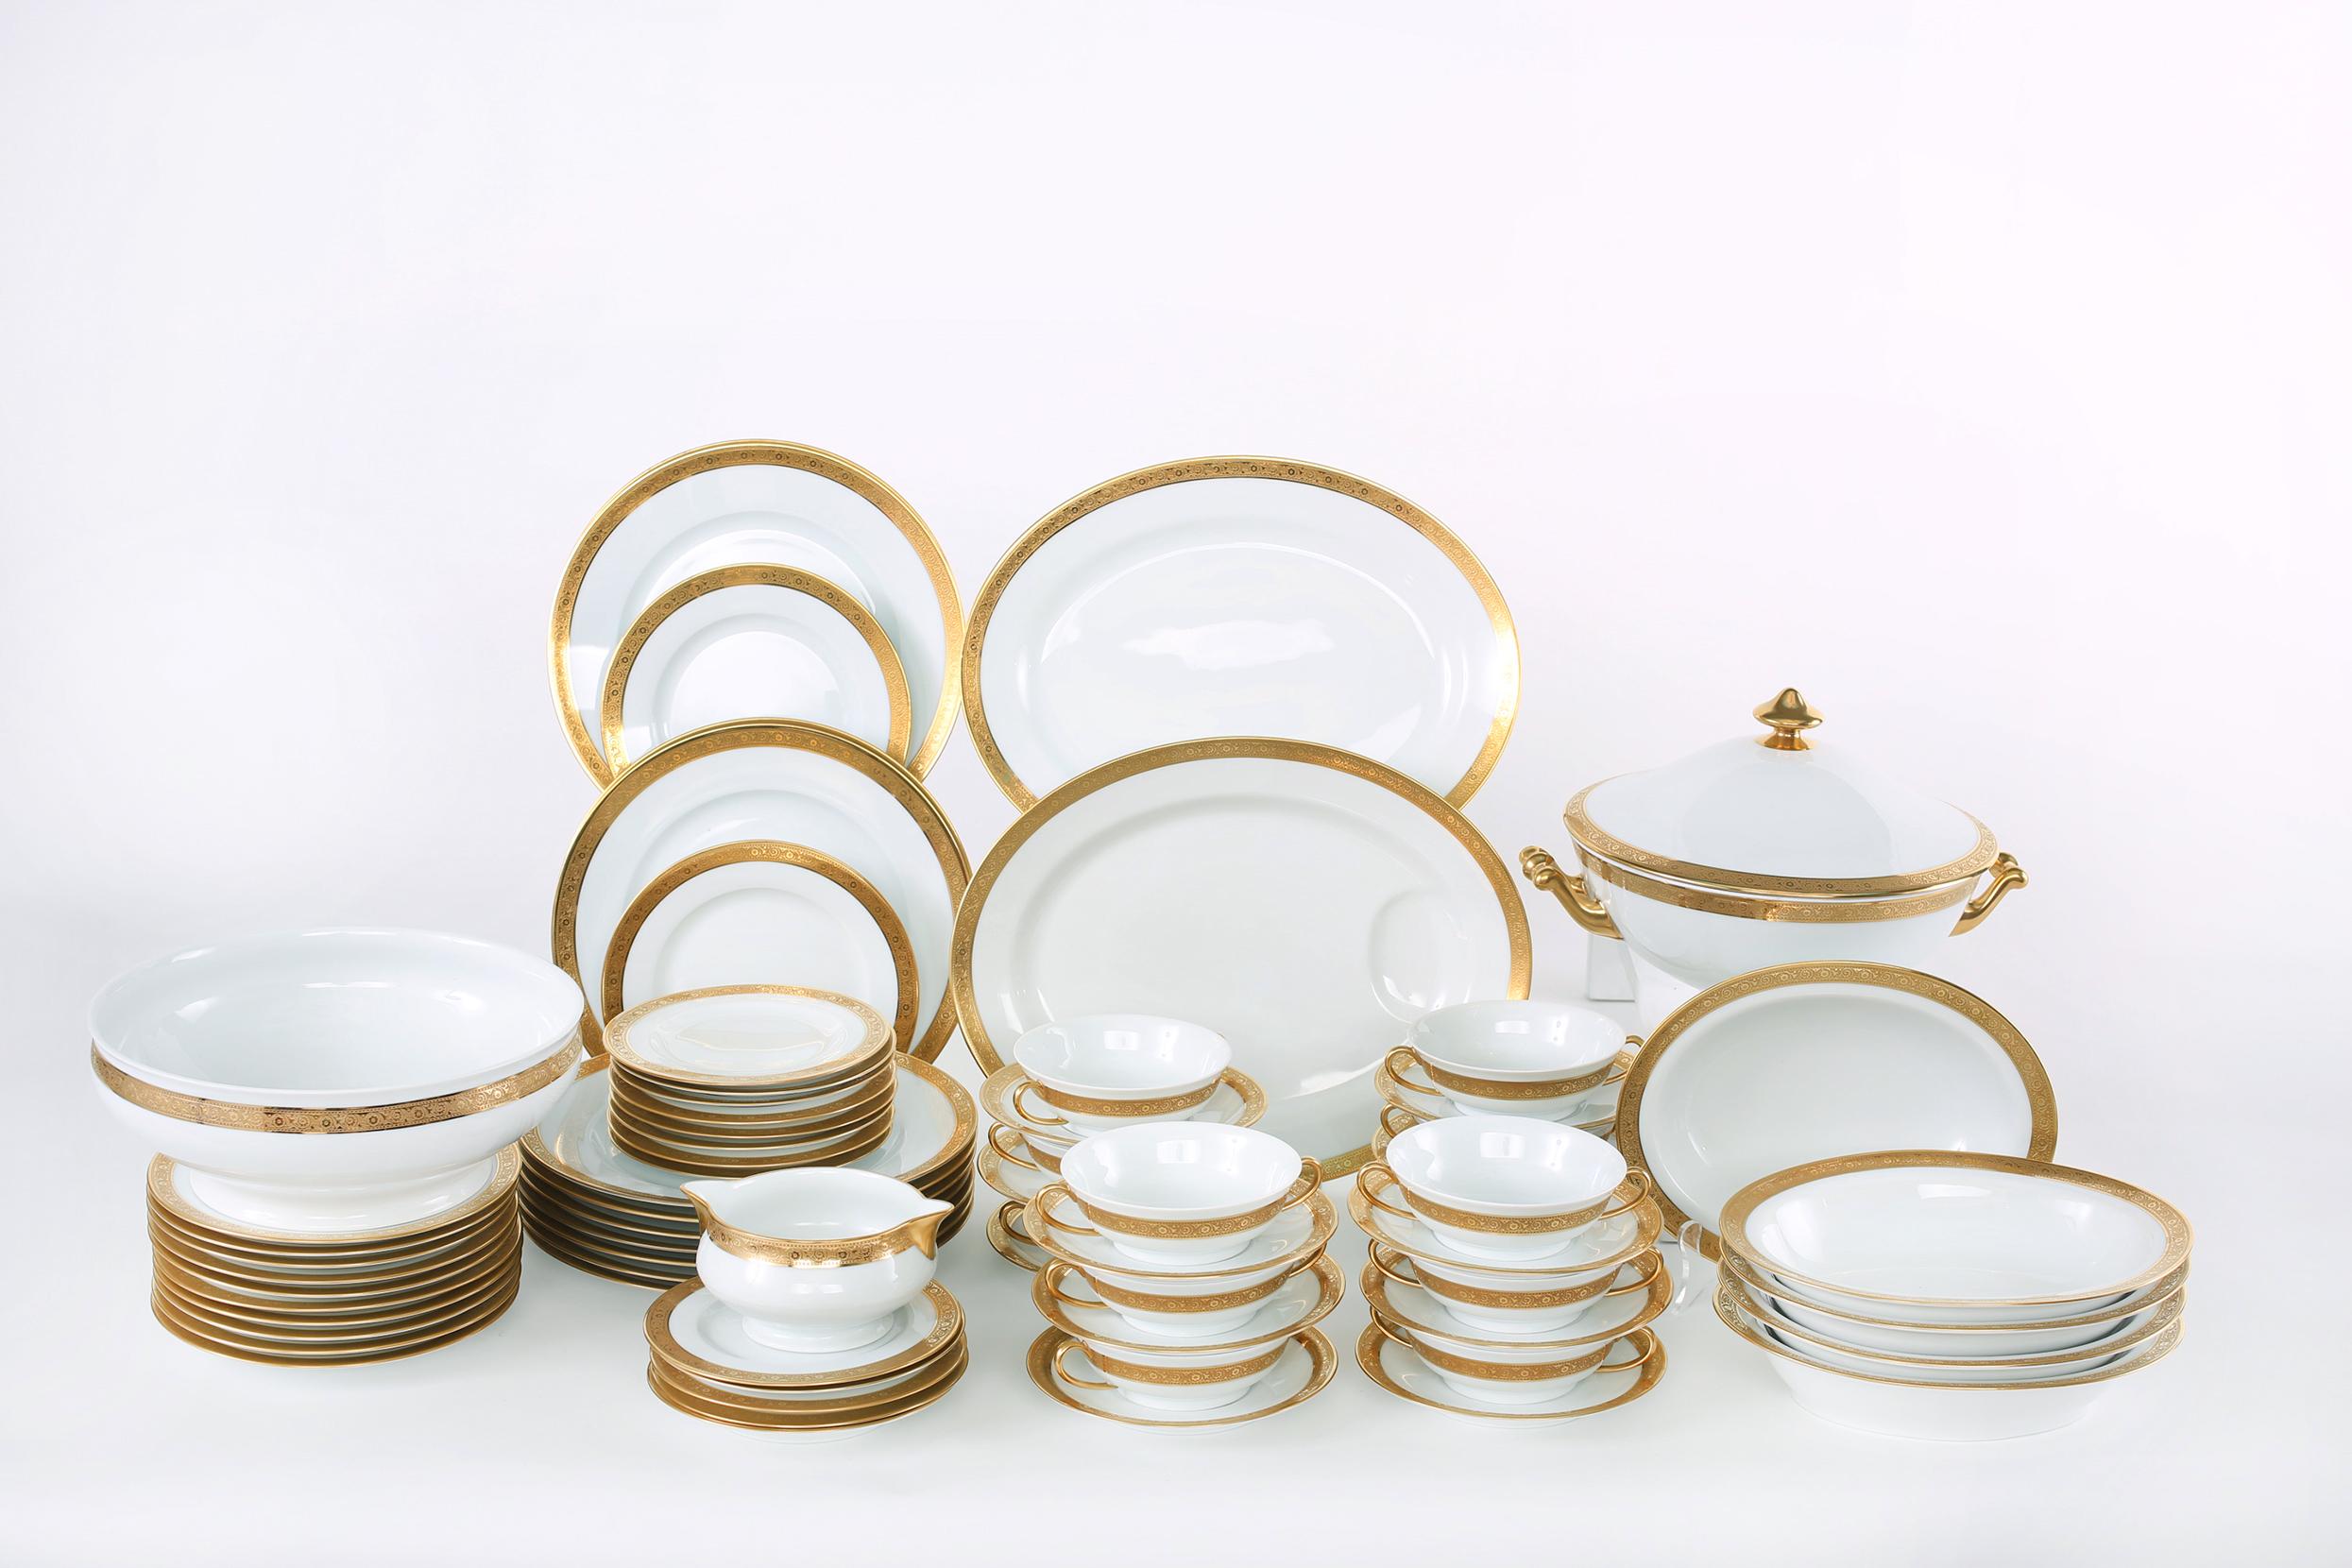 Late 20th century Haviland, Limoges France gilt porcelain complete dinnerware service for twelve people with Serving piece. Each piece is great condition. Marks (Tower) Haviland Limoges, France undersigned. Alltogether 69 pieces. Set include: 12